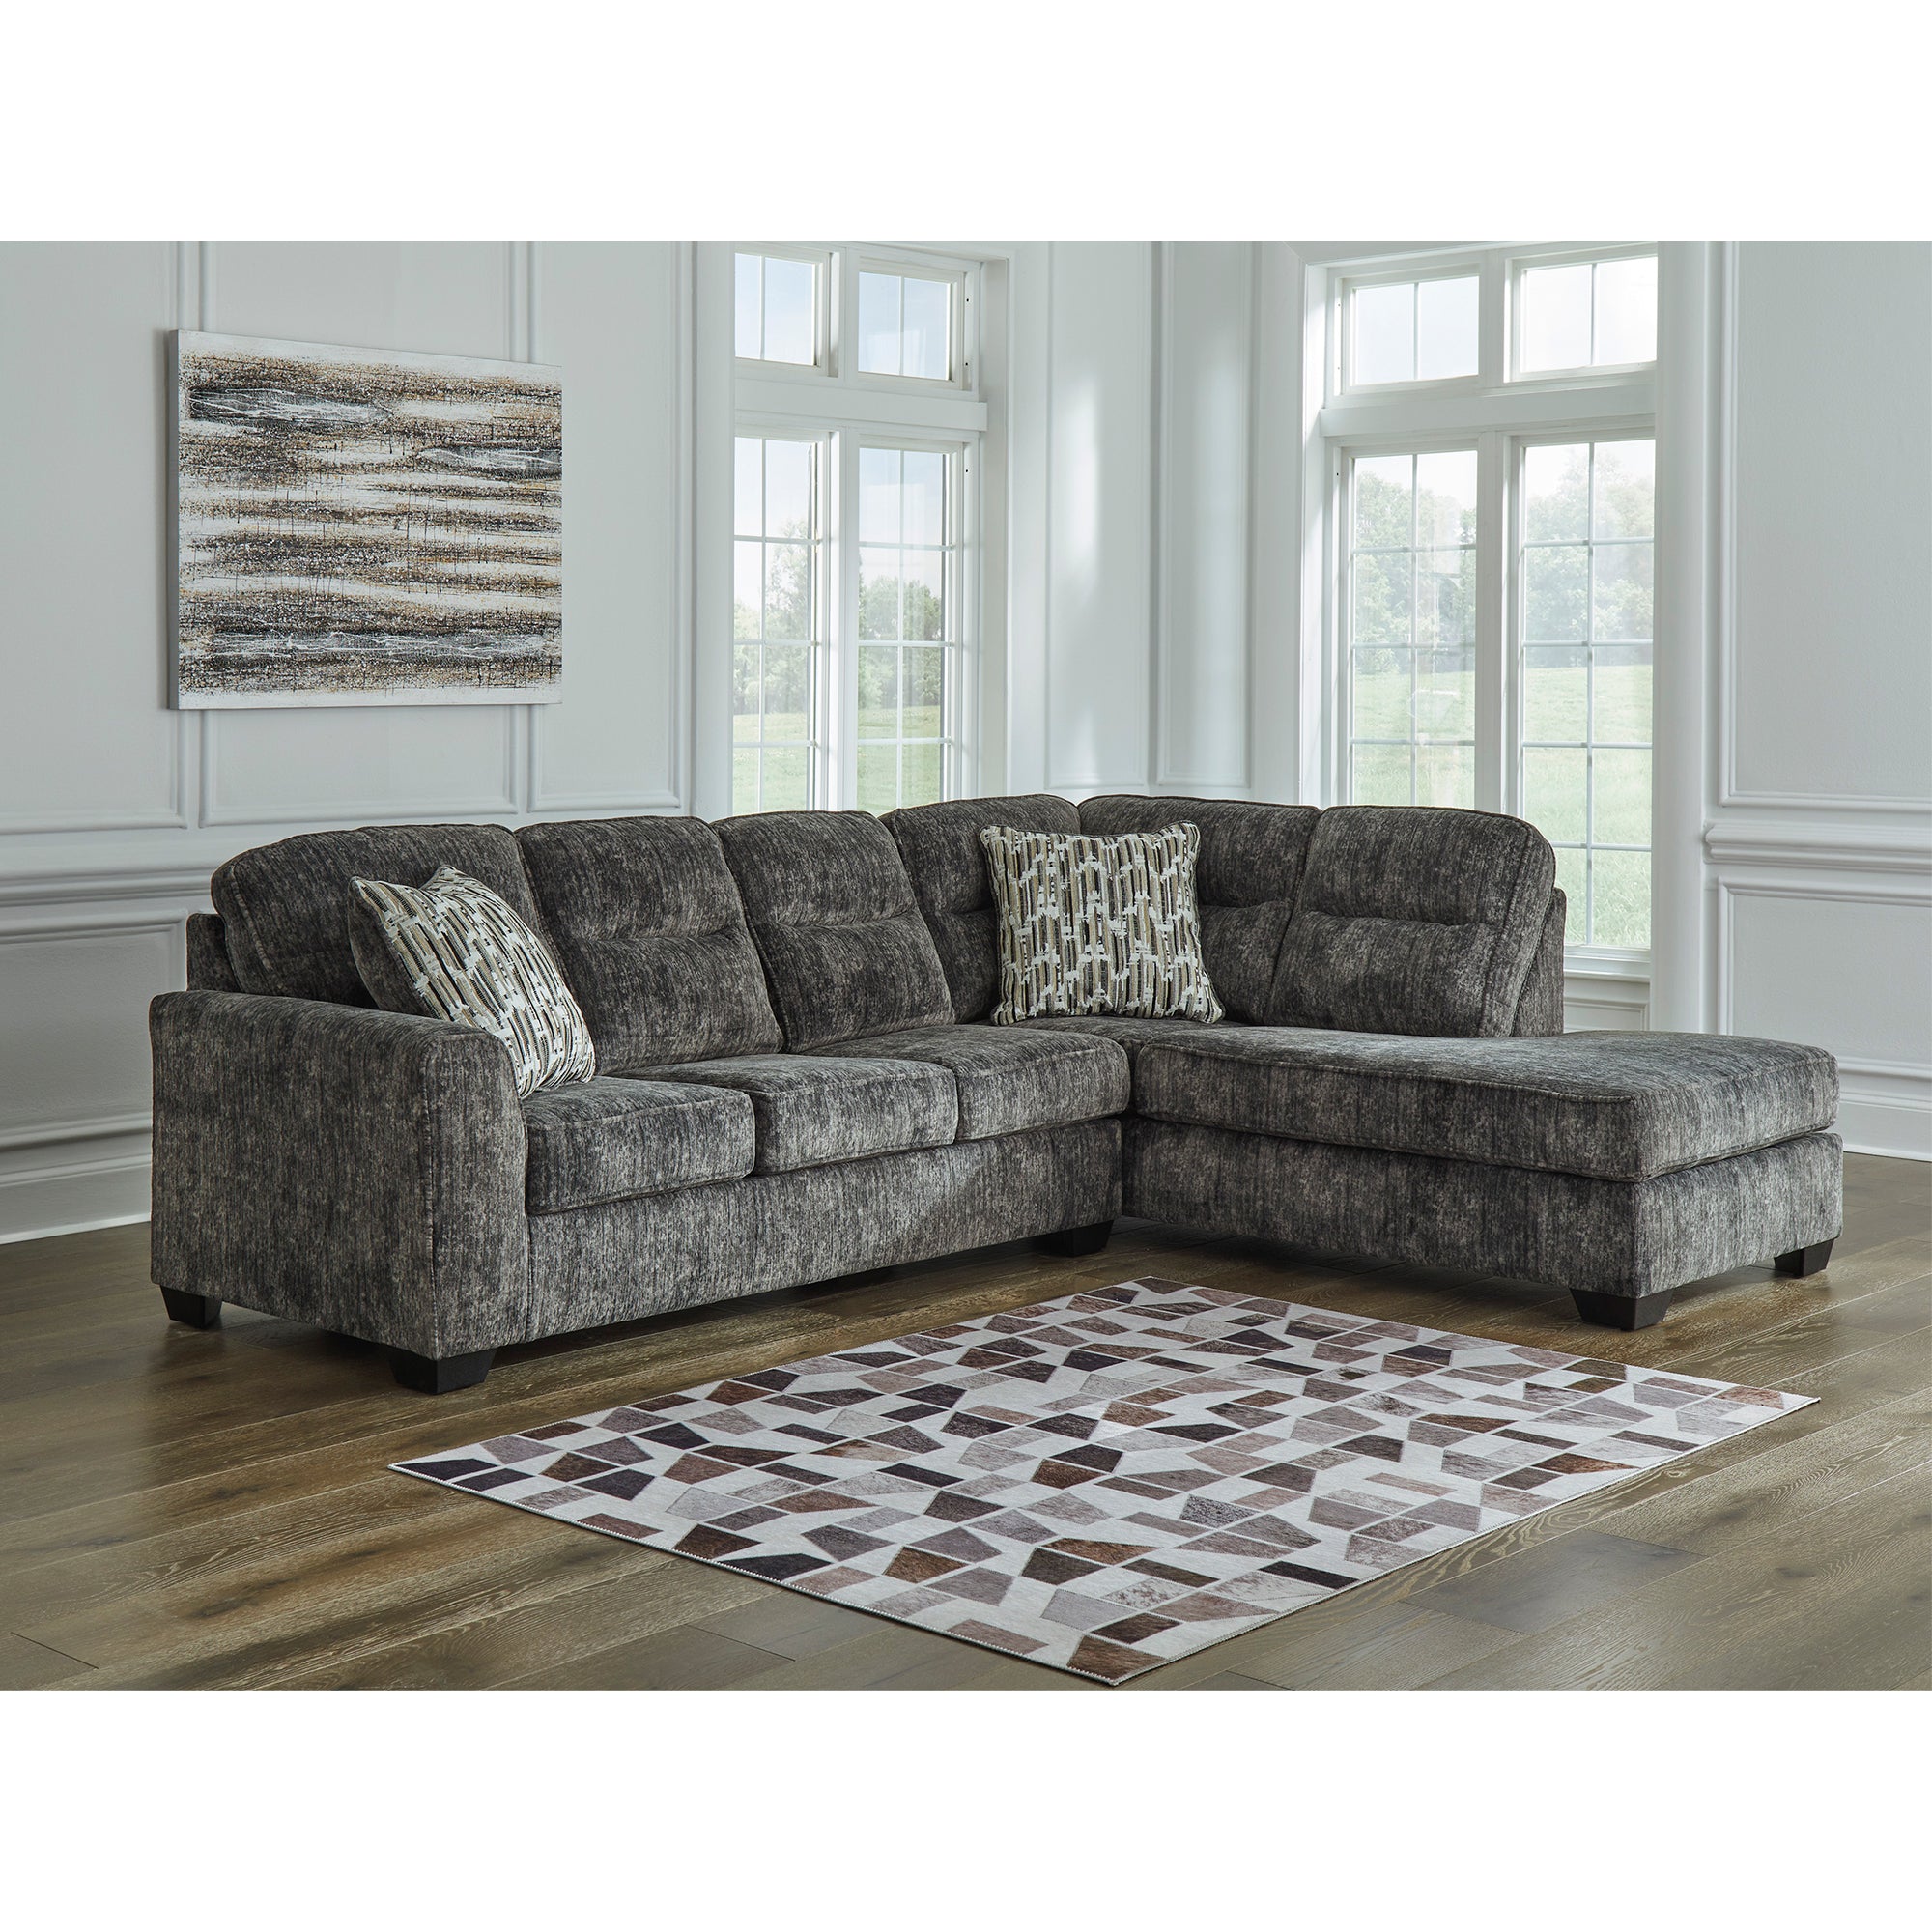 Lonoke 2-Piece Sectional with Chaise in Gunmetal Color